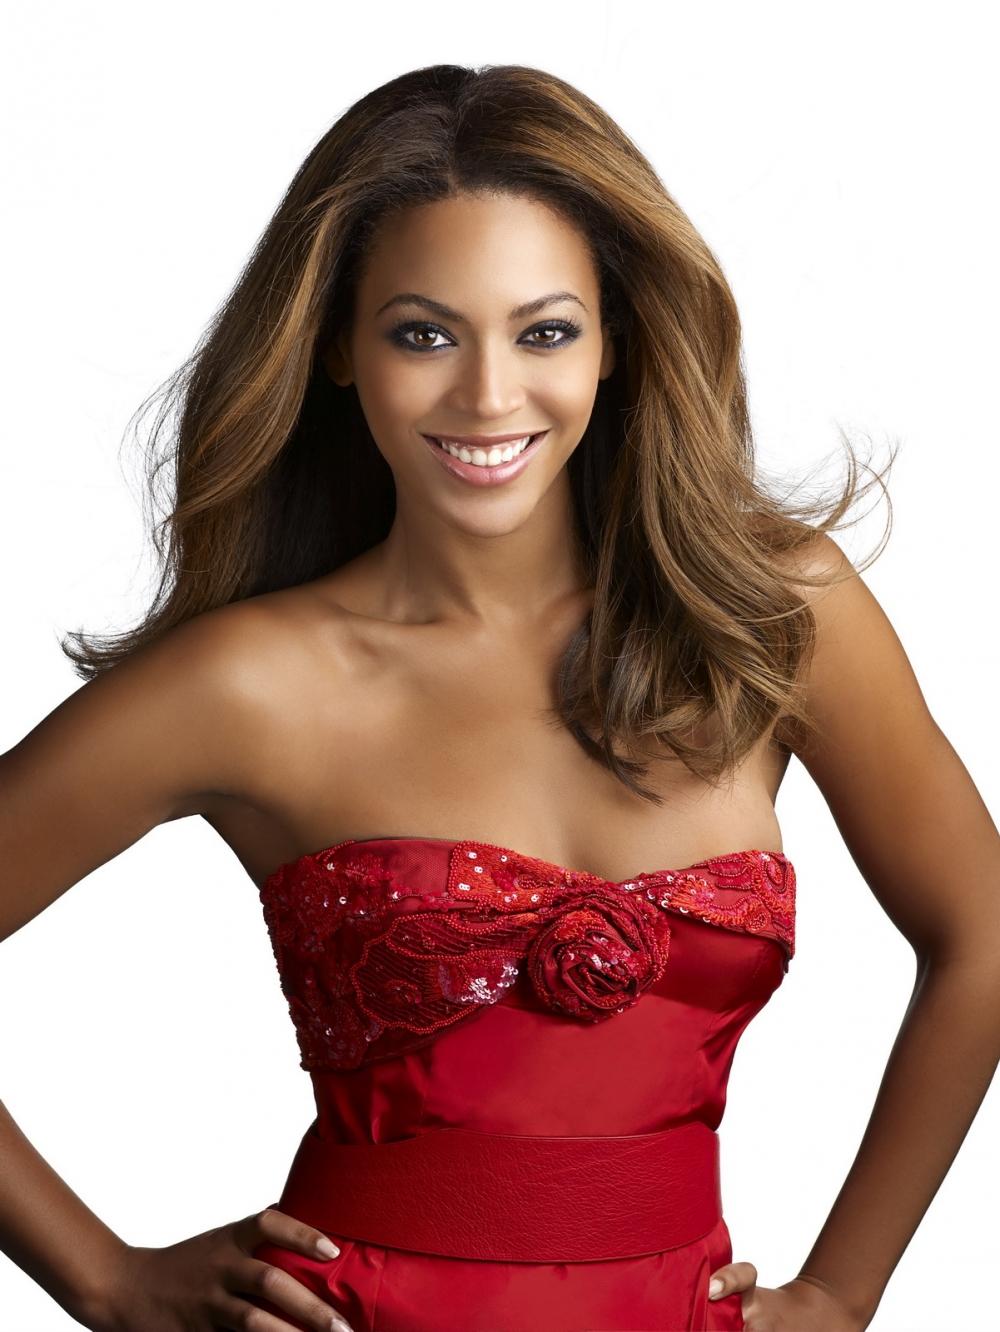 Photo №3270 Beyonce Knowles.